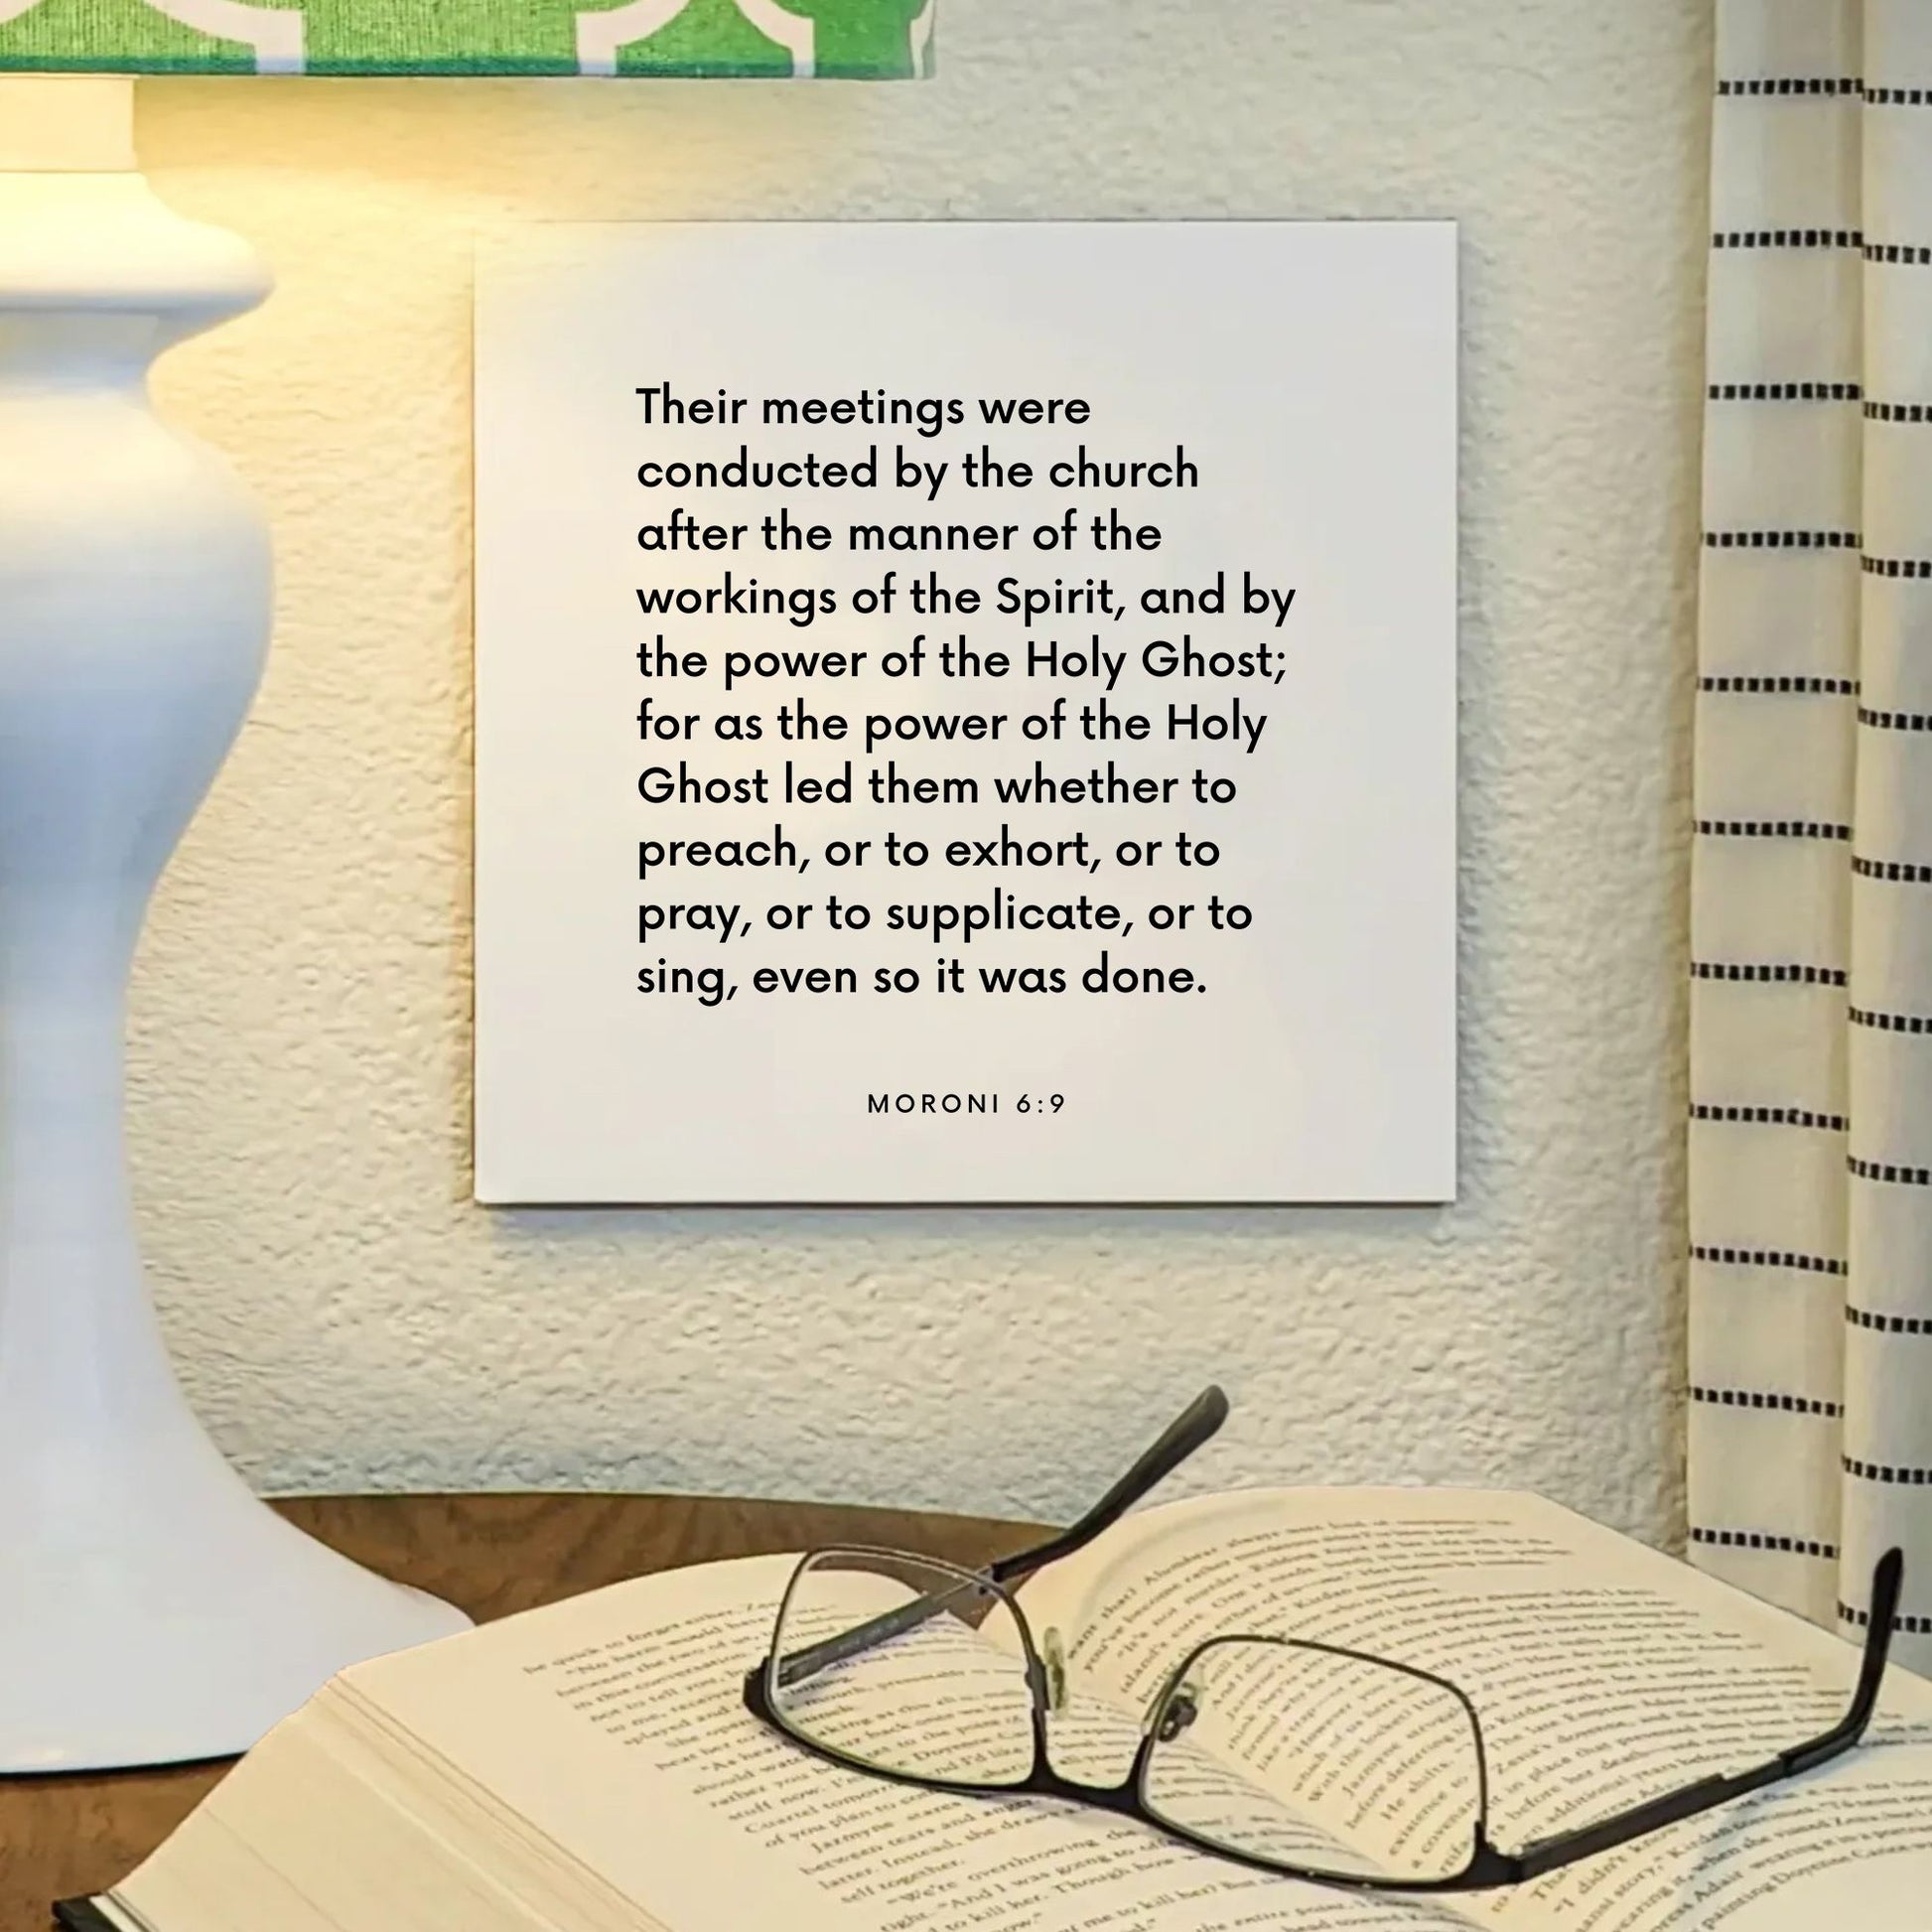 Lamp mouting of the scripture tile for Moroni 6:9 - "Their meetings were conducted by the Spirit"